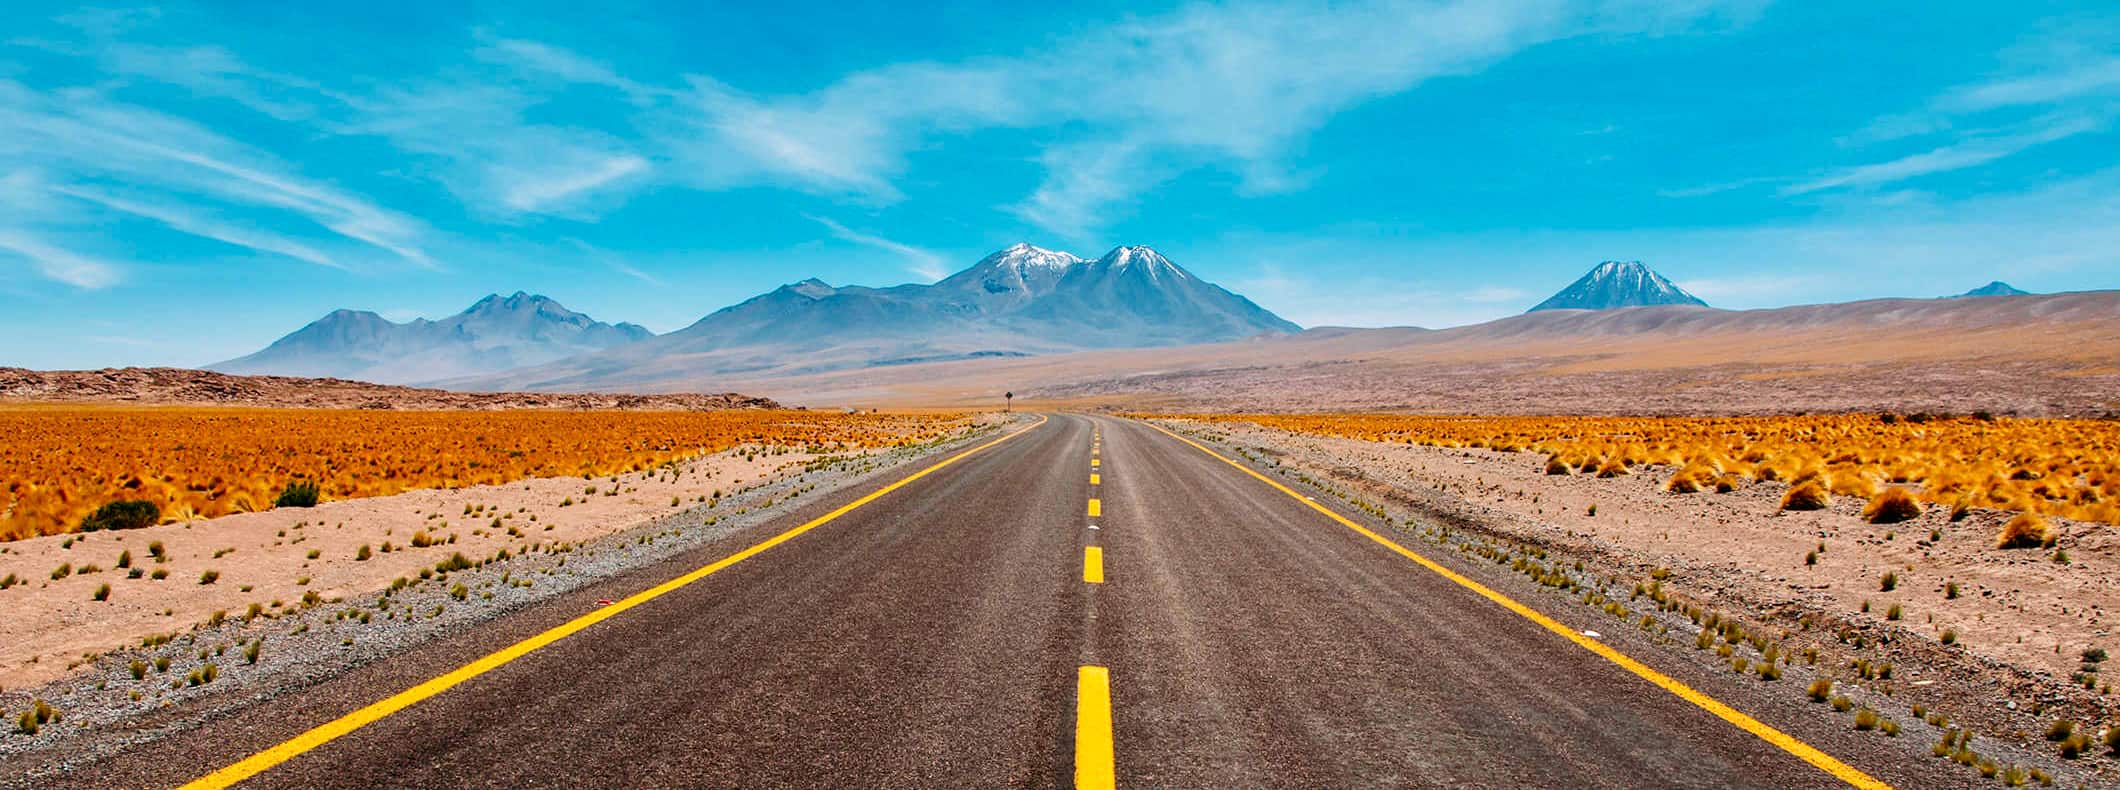 A wide open road in the desert with a bright blue sky and mountains in the distance